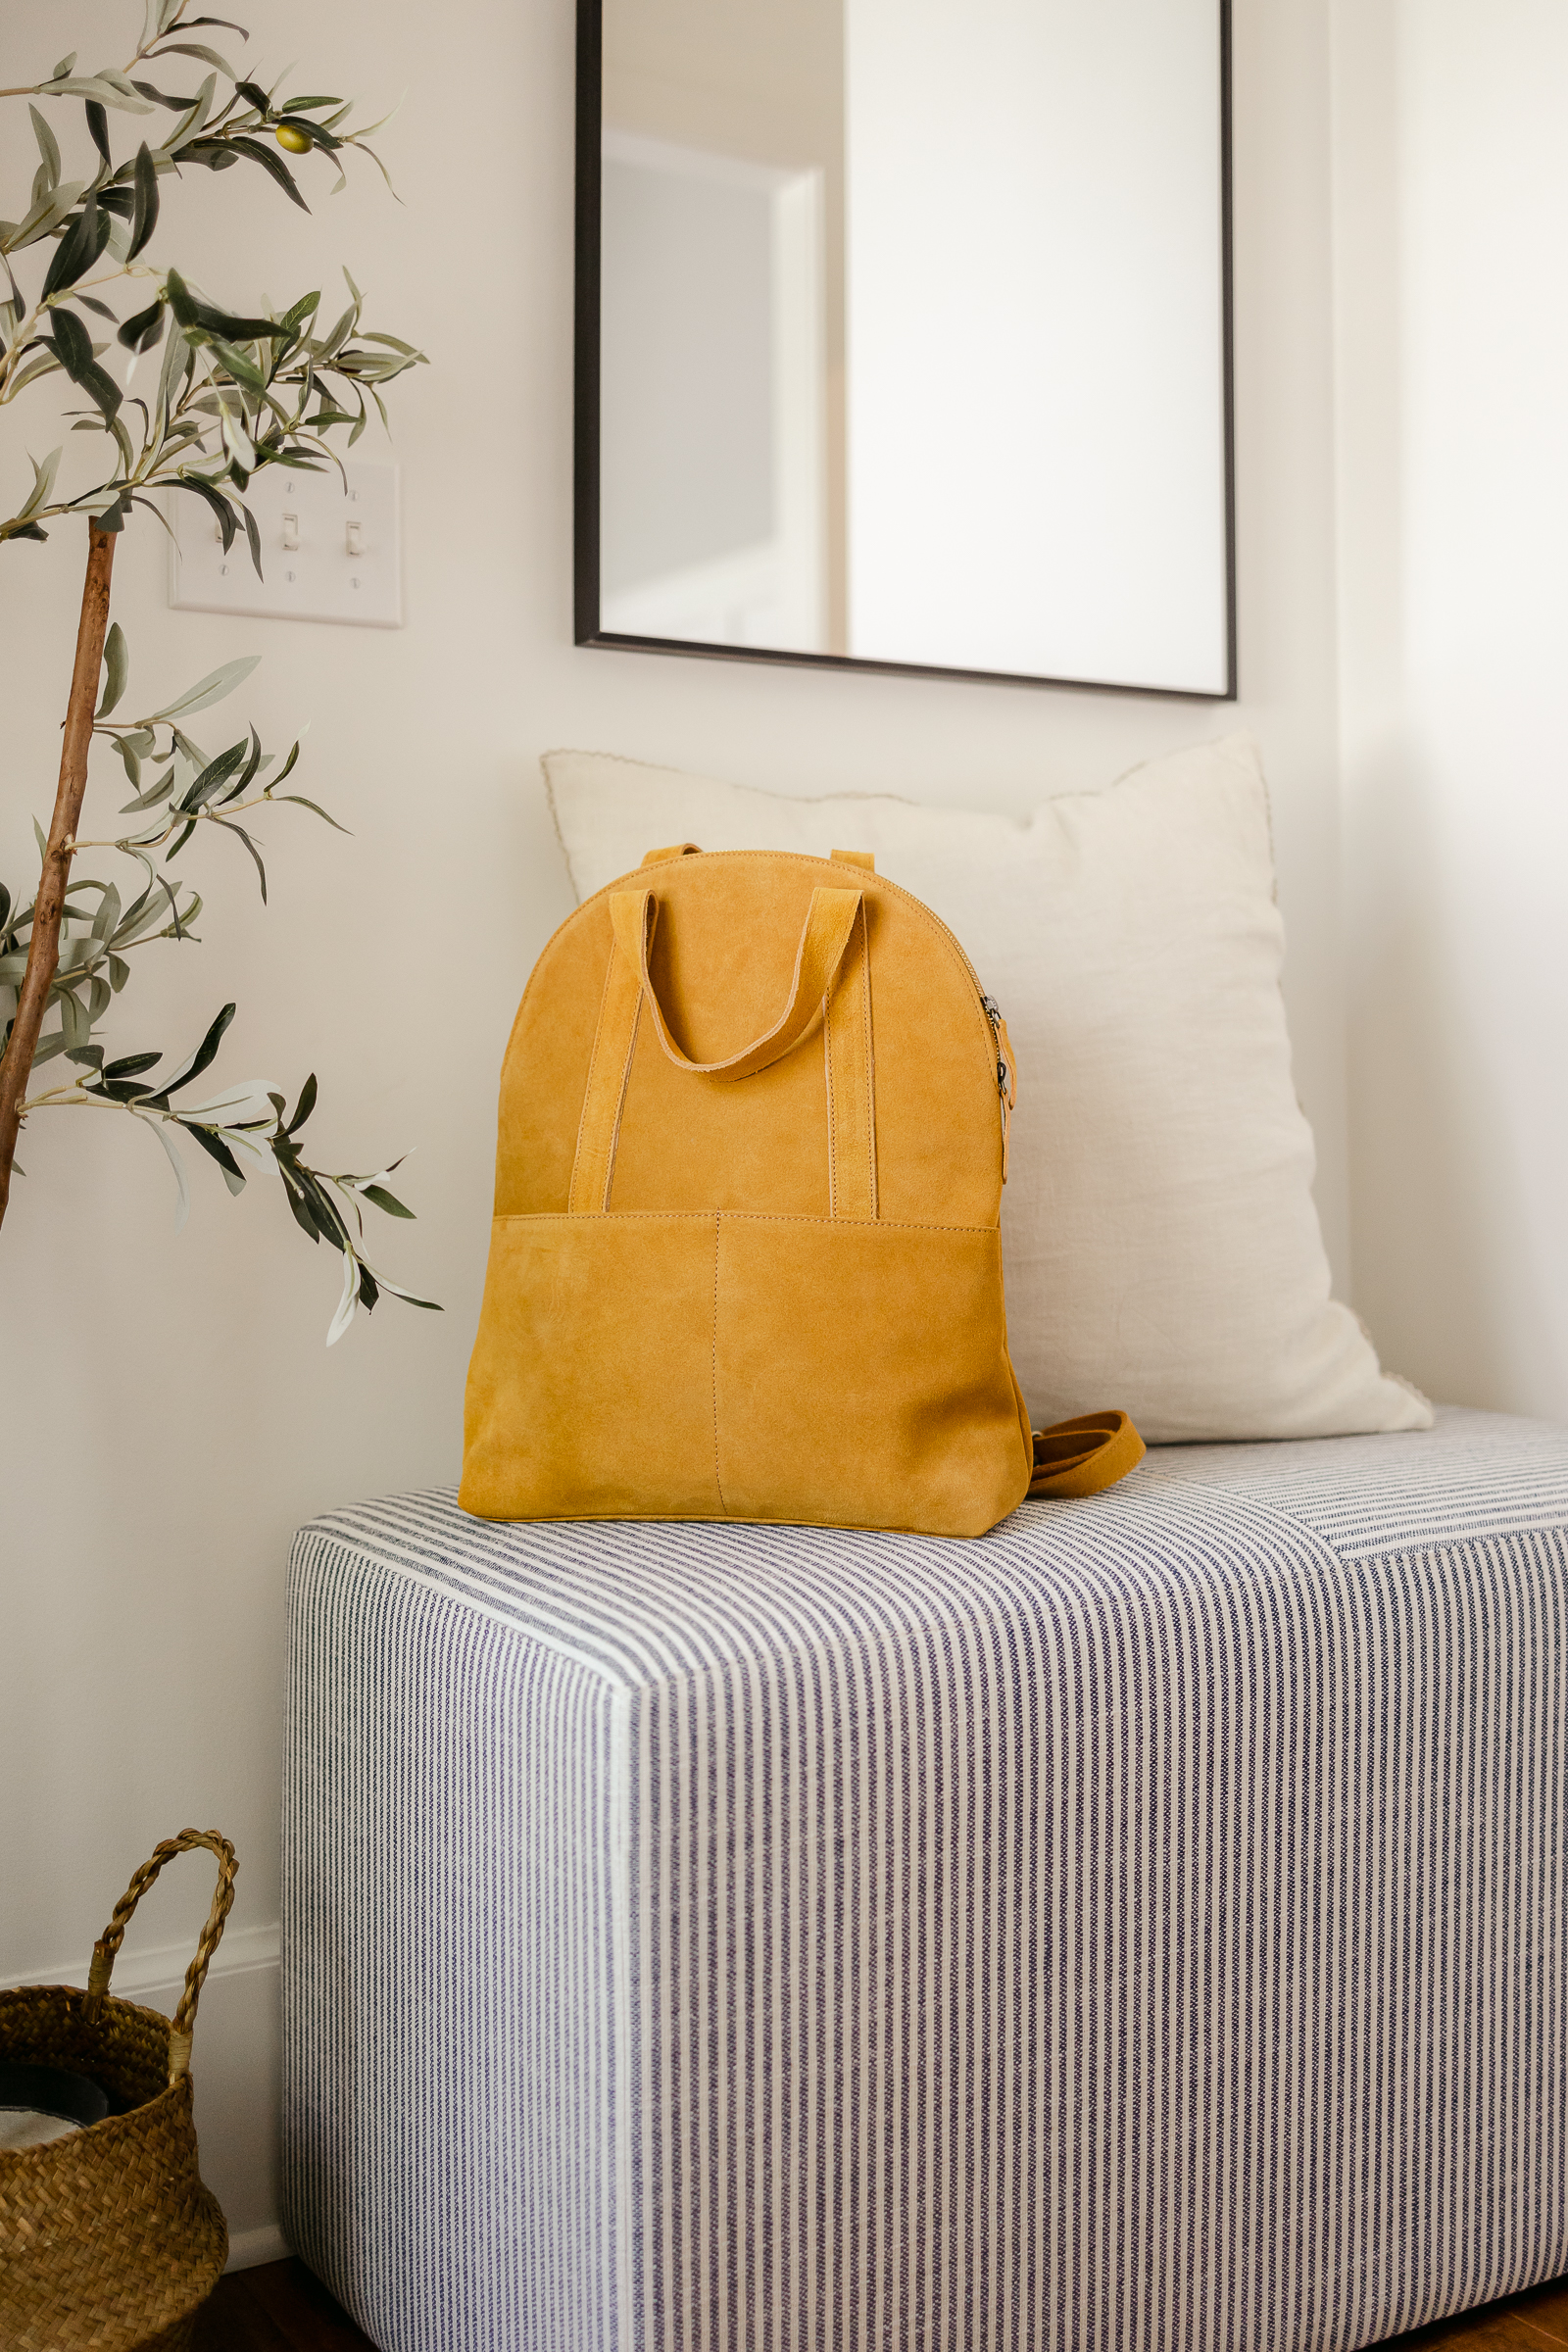 sunny yellow suede backpack sitting on a striped bench in the entryway of the home